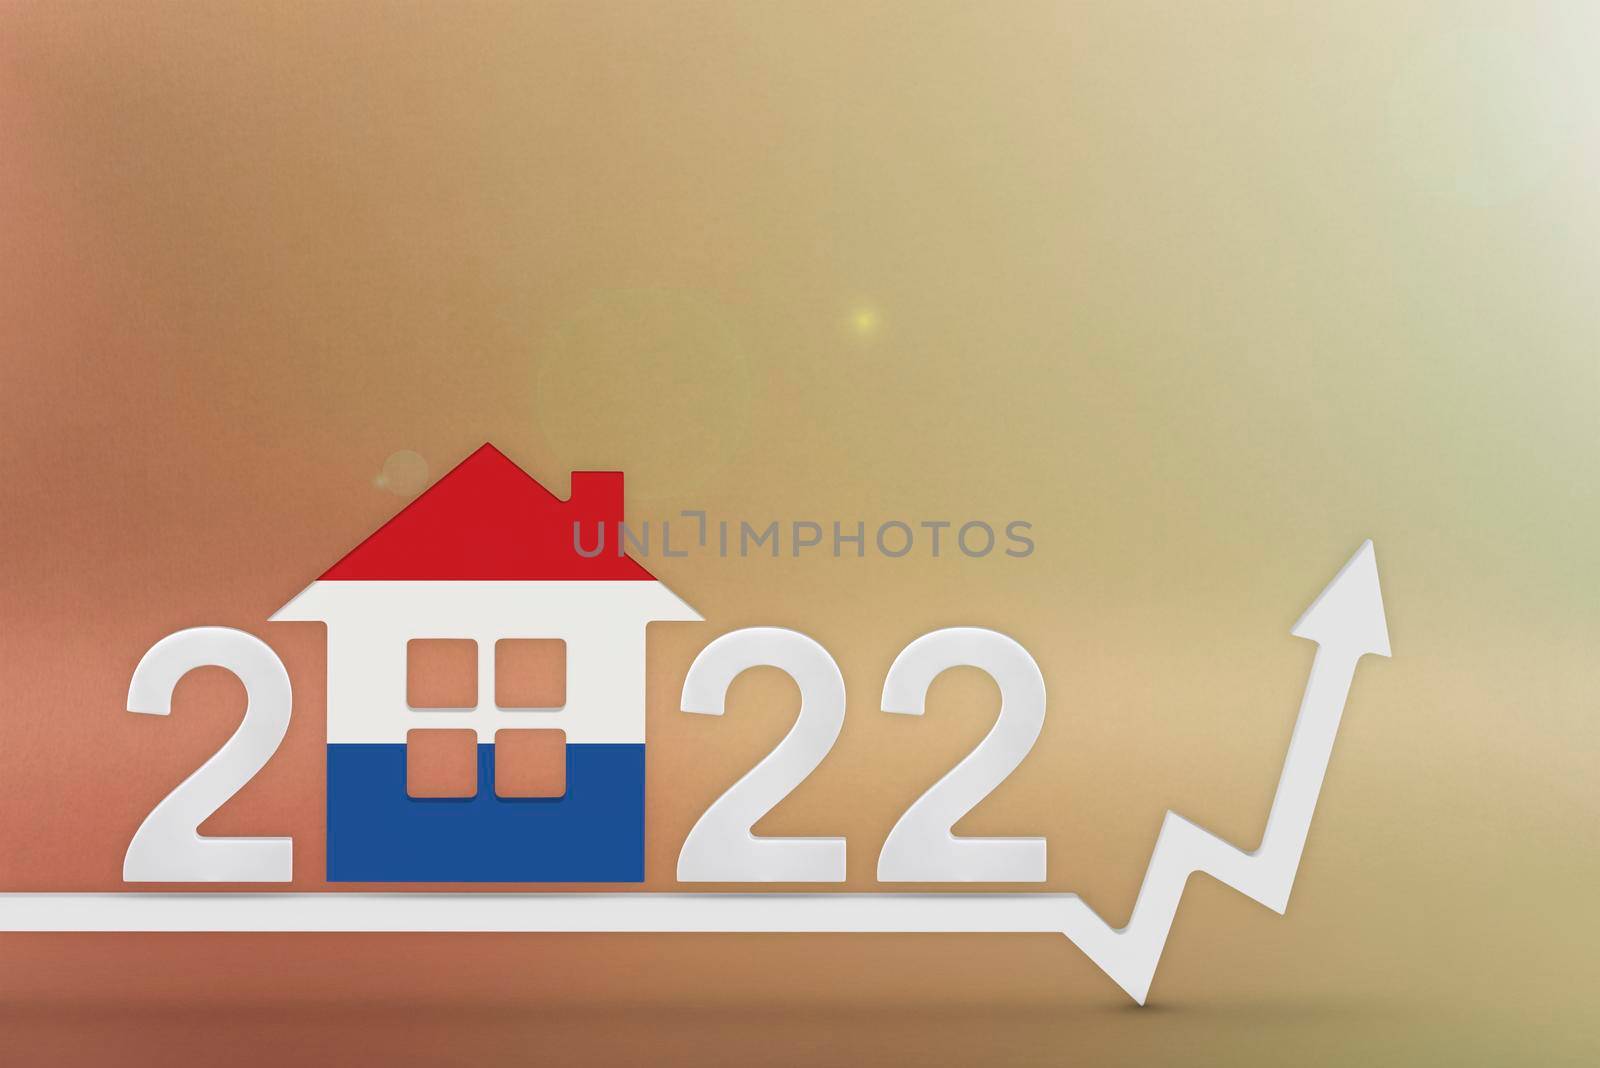 The cost of real estate in Netherlands in 2022. Rising cost of construction, insurance, rent in Netherlands. 3d house model painted in flag colors, up arrow on yellow background by SERSOL